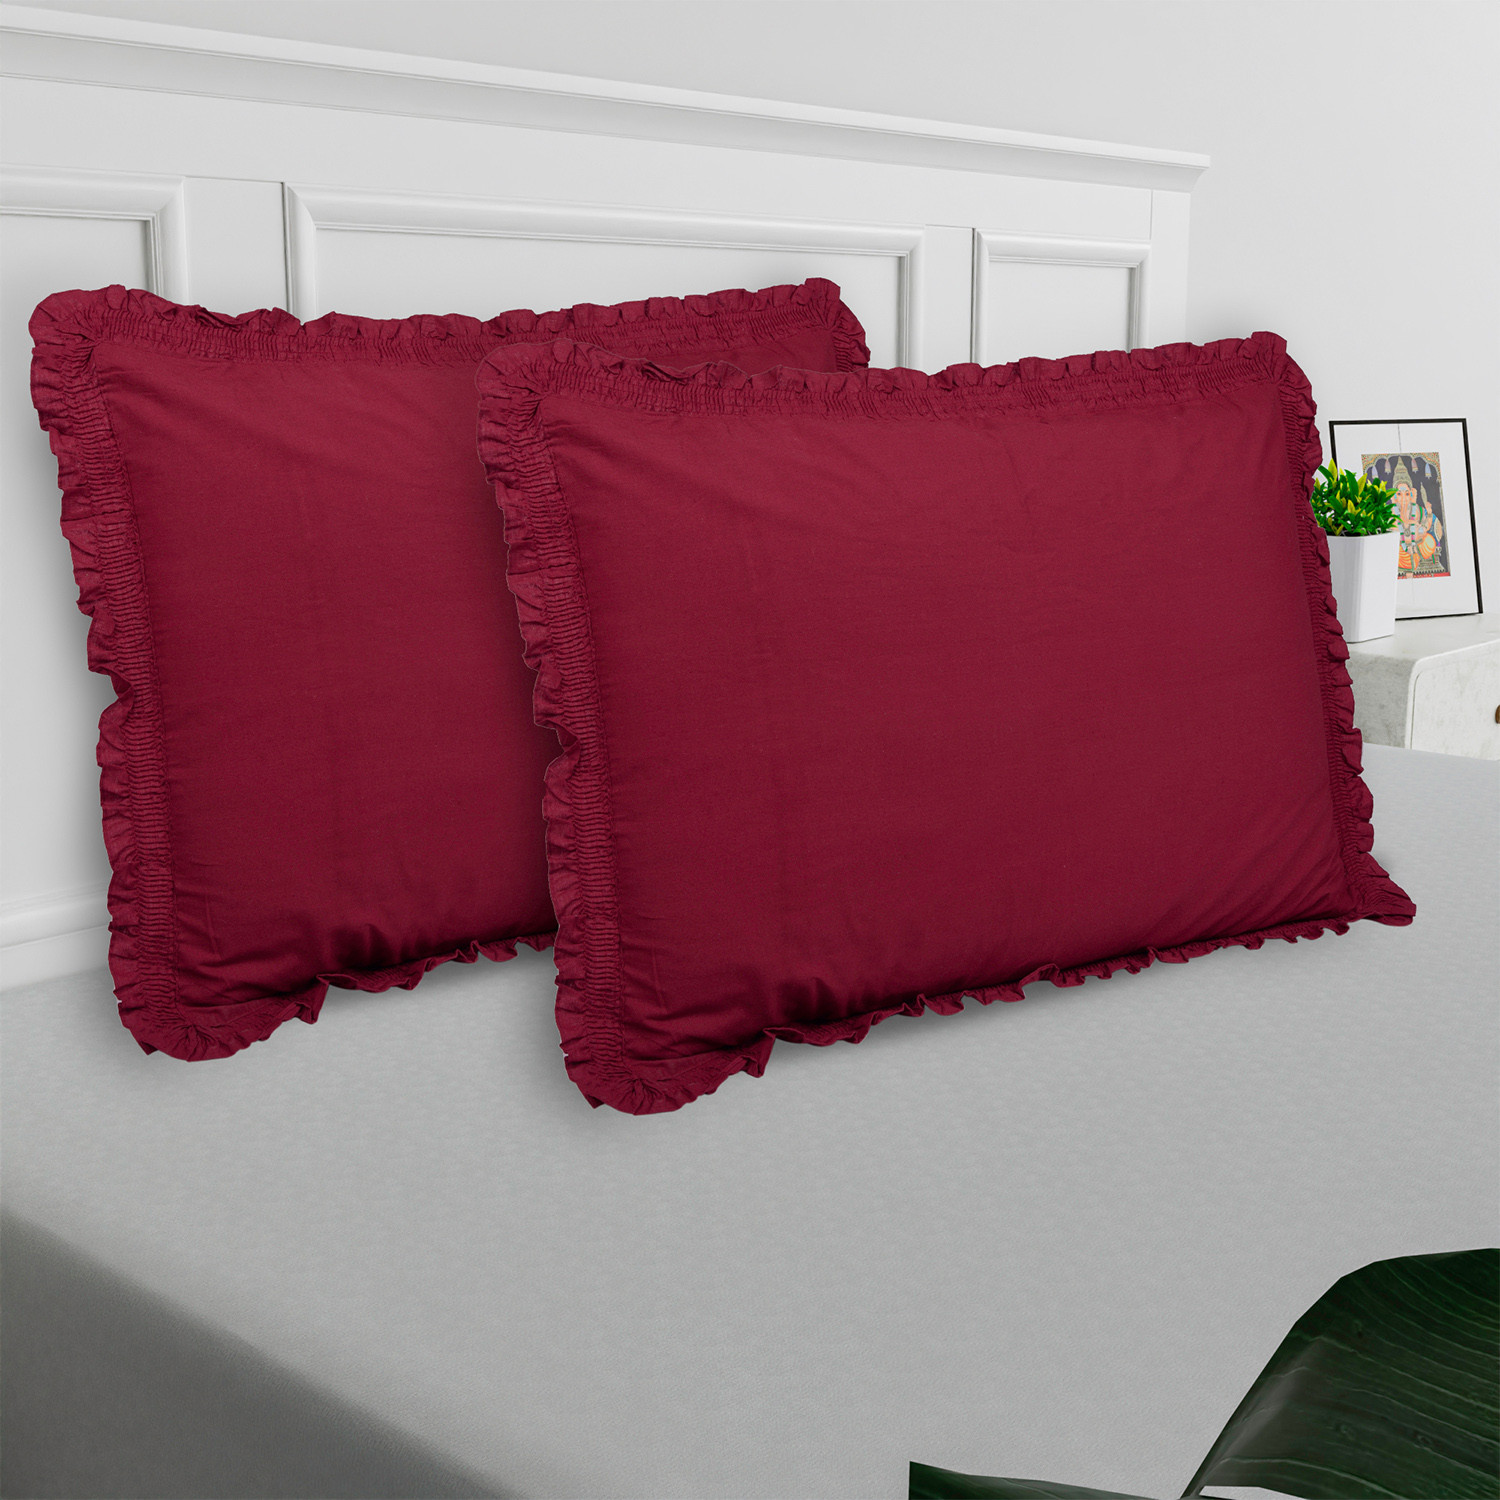 Kuber Industries Pillow Cover | Cotton Pillow Cover | Pillow Cover For Bedroom | Pleated Frill Border Long Crush Pillow Cover | Set of 4 | 20x30 Inch | Maroon